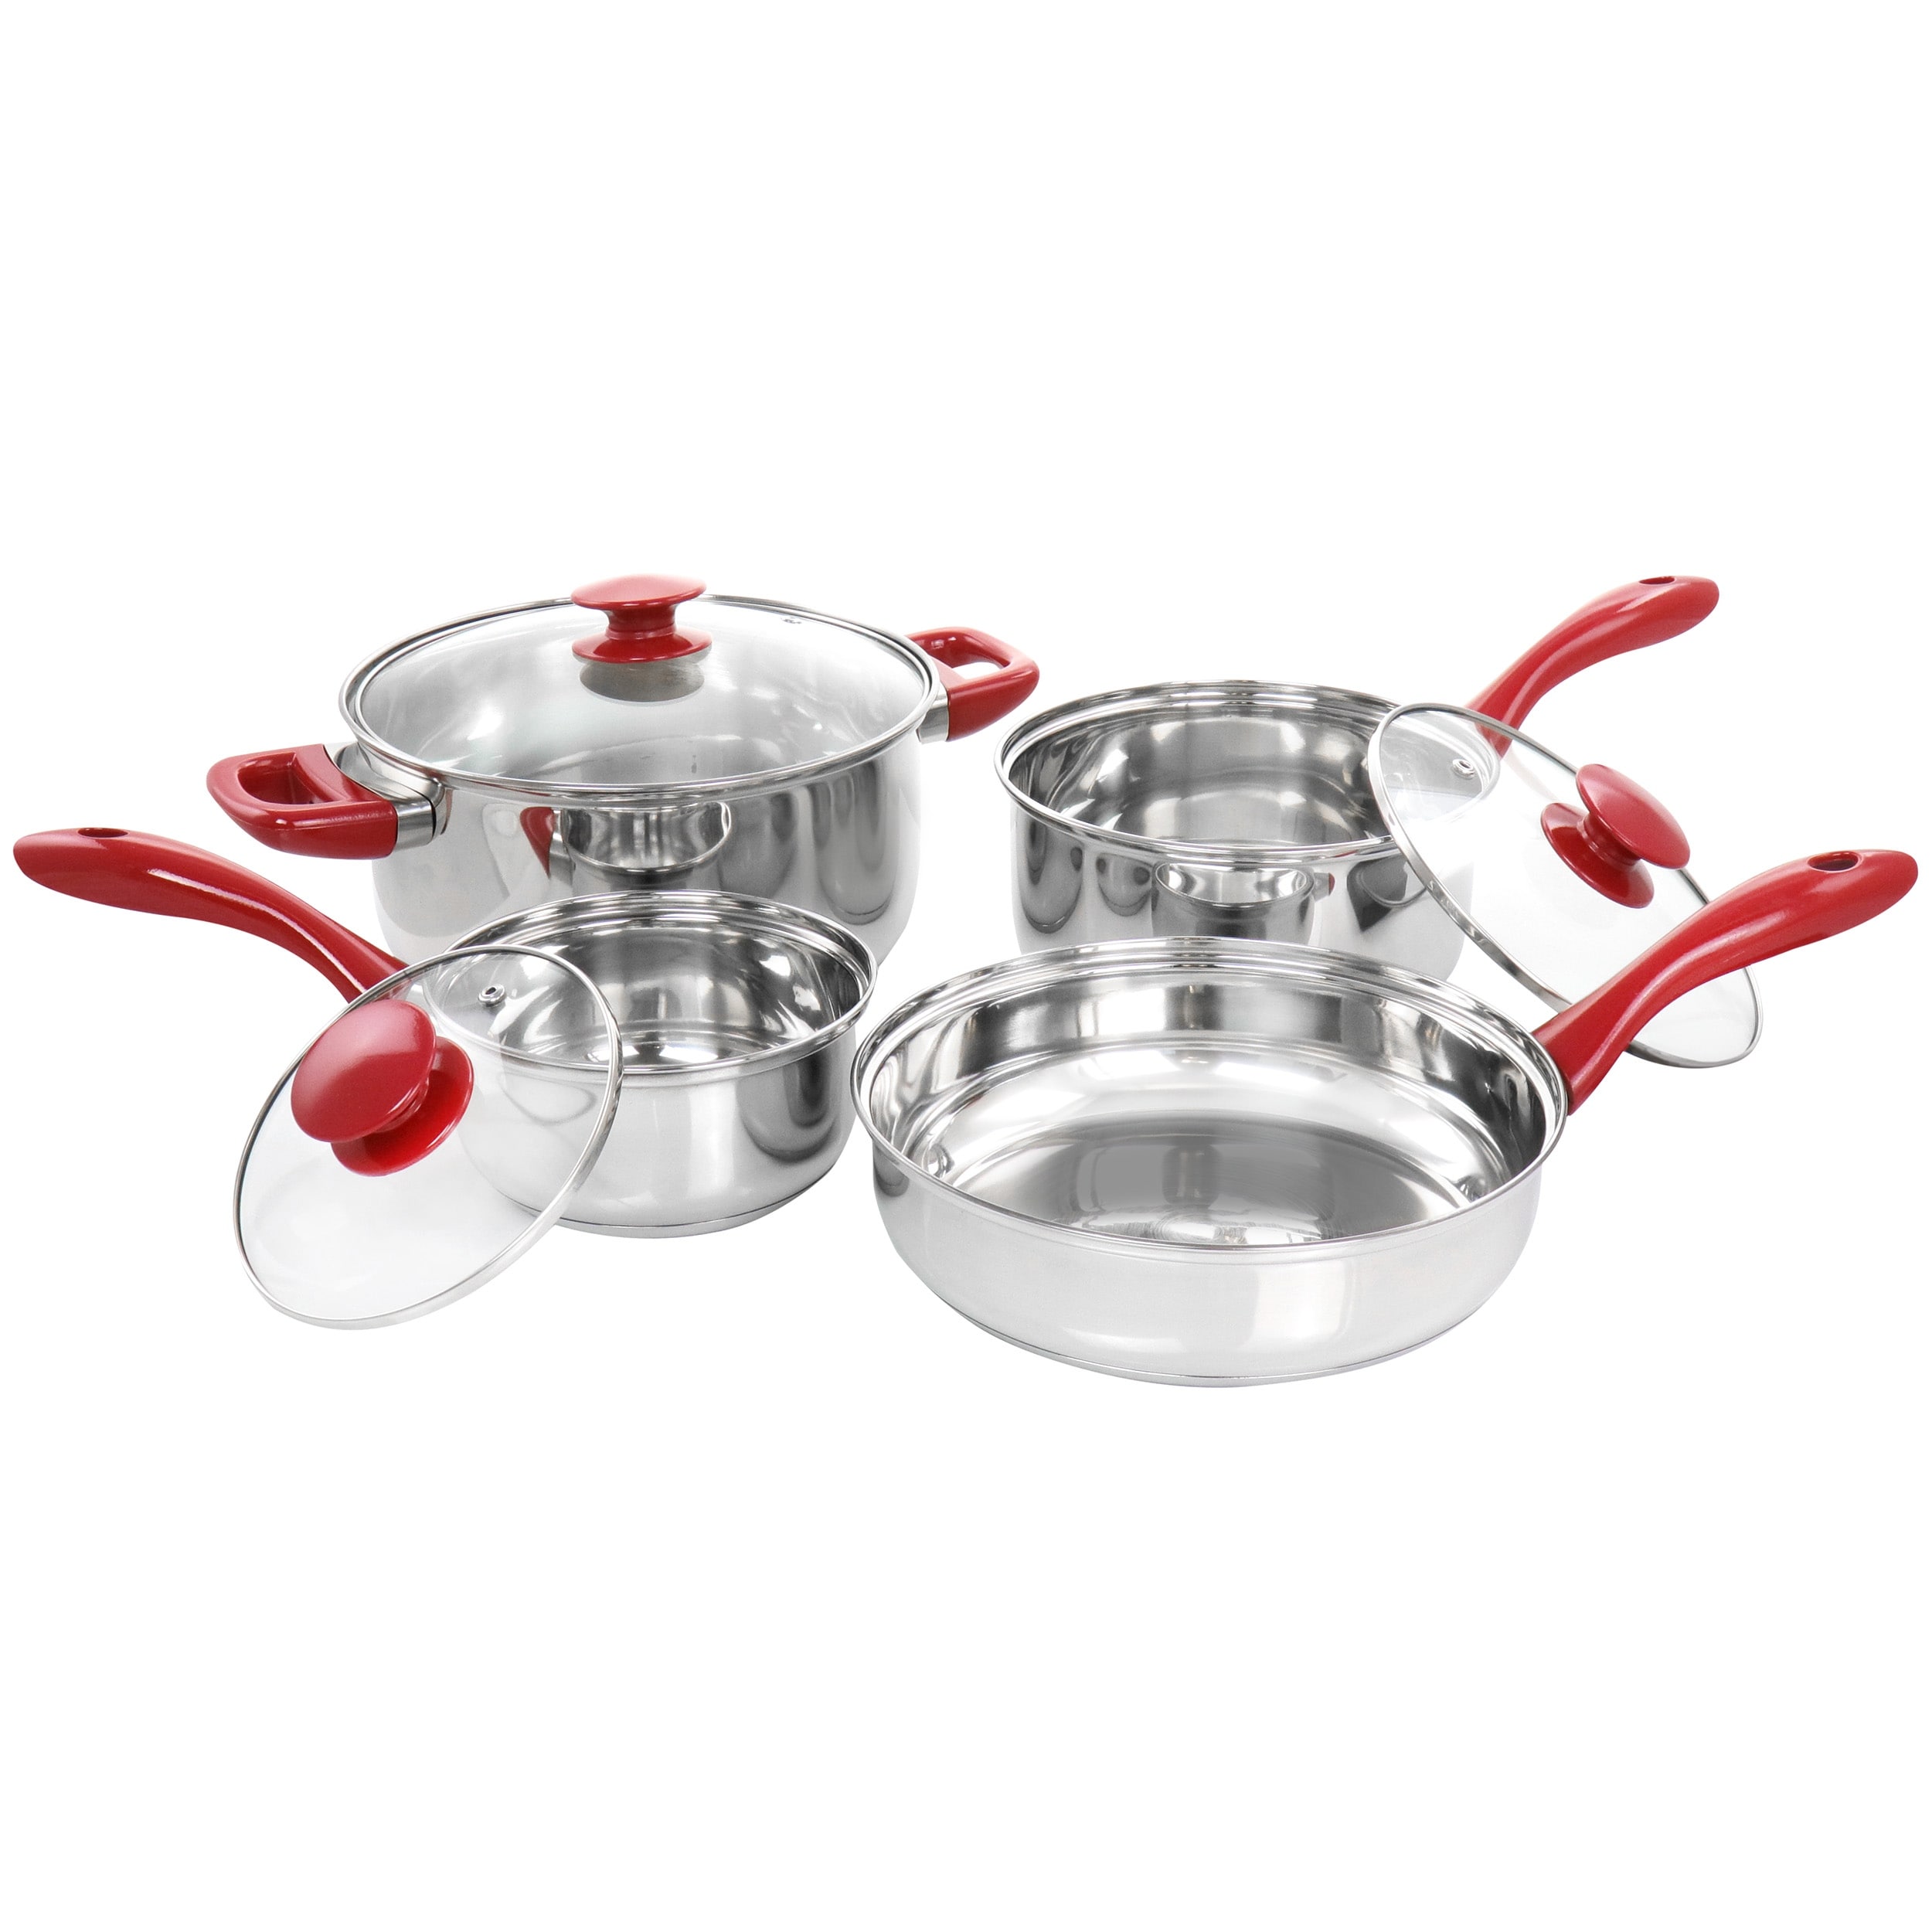 https://ak1.ostkcdn.com/images/products/is/images/direct/9d4bc41cedcb5f74e0022d4af9149a425b113c93/Gibson-Home-Crawson-7-Piece-Stainless-Steel-Cookware-Set-in-Chrome-with-Red-Handles.jpg